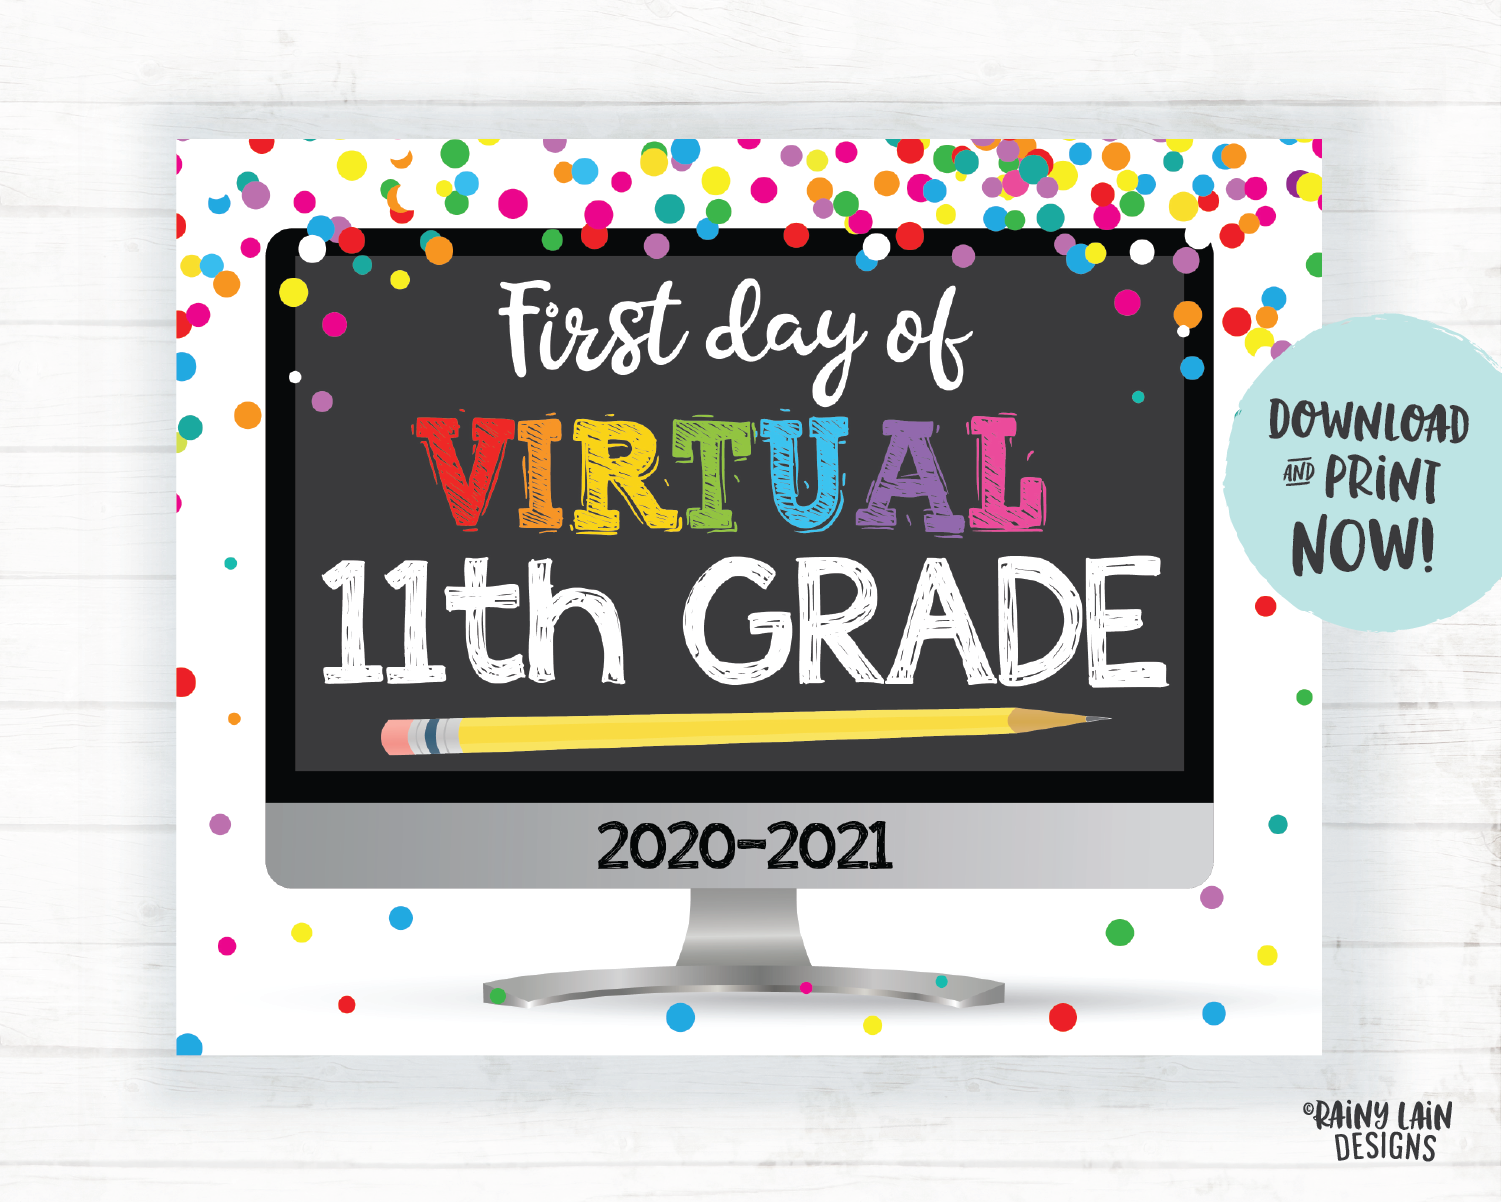 First Day of Virtual 11th Grade Sign, Virtual School Sign, First Day of School Distance Learning, E-Learning, Online School, Home School